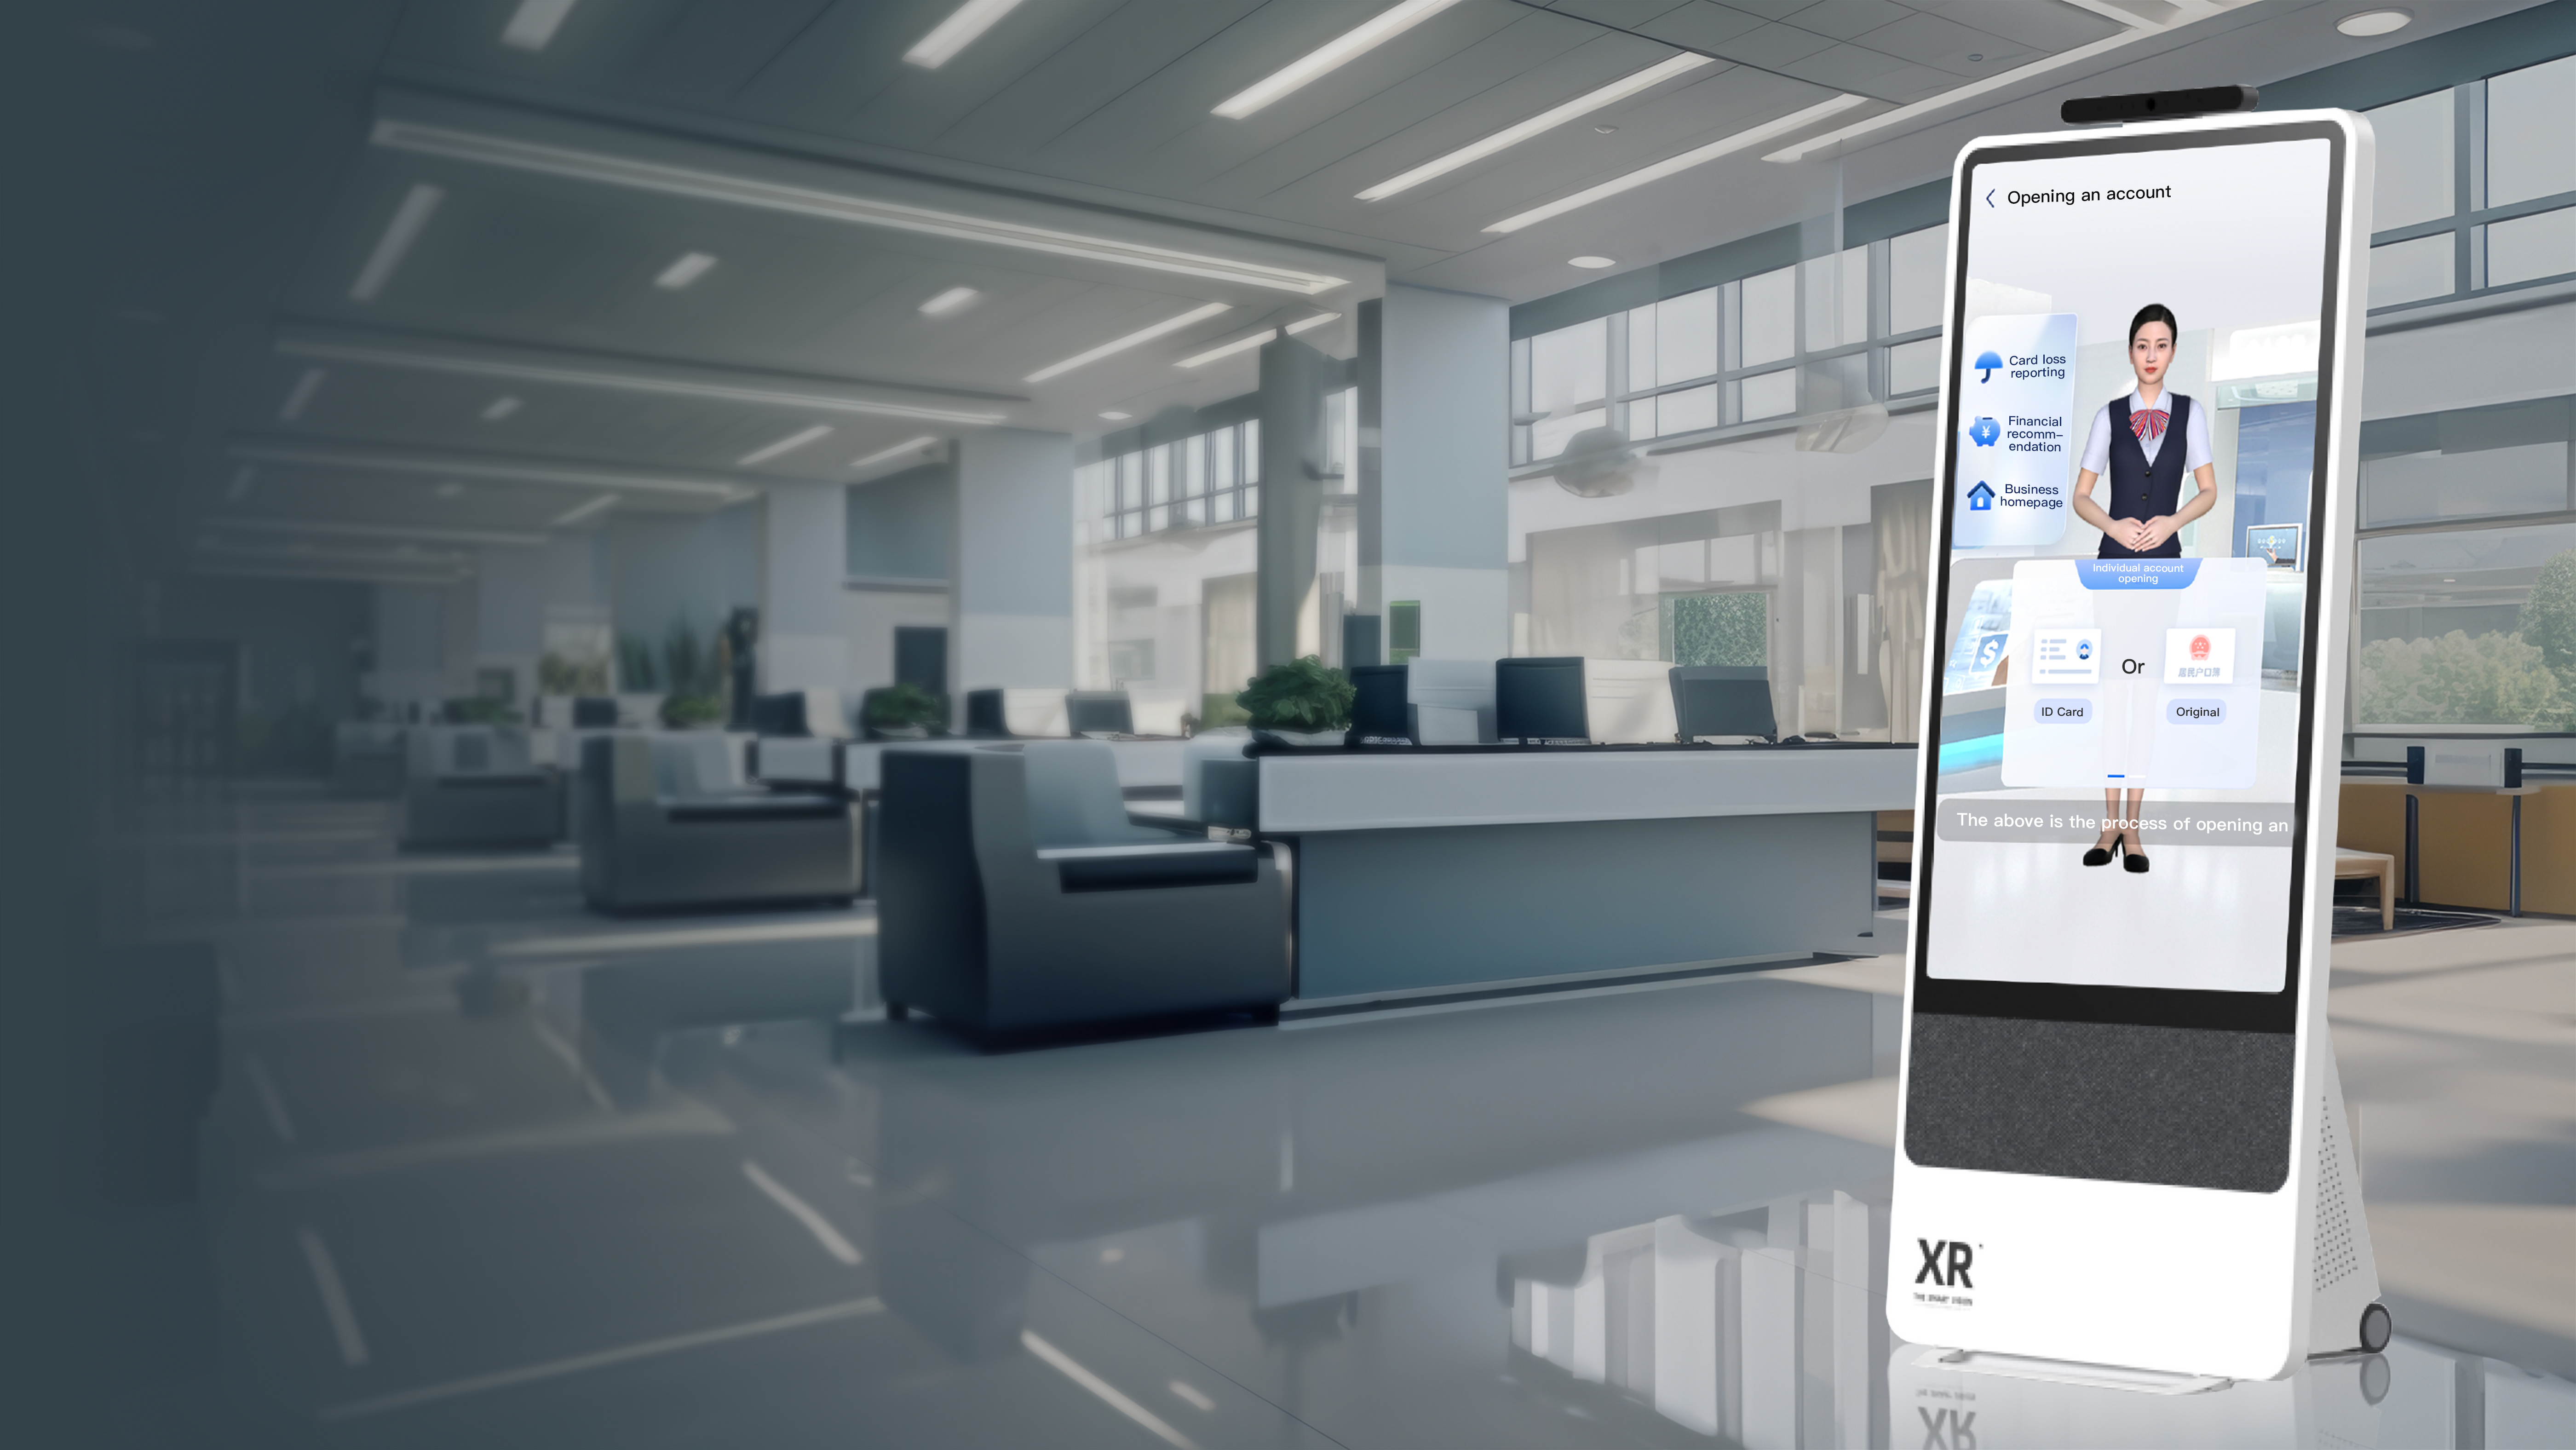 Large Display Assistants in Business Centers